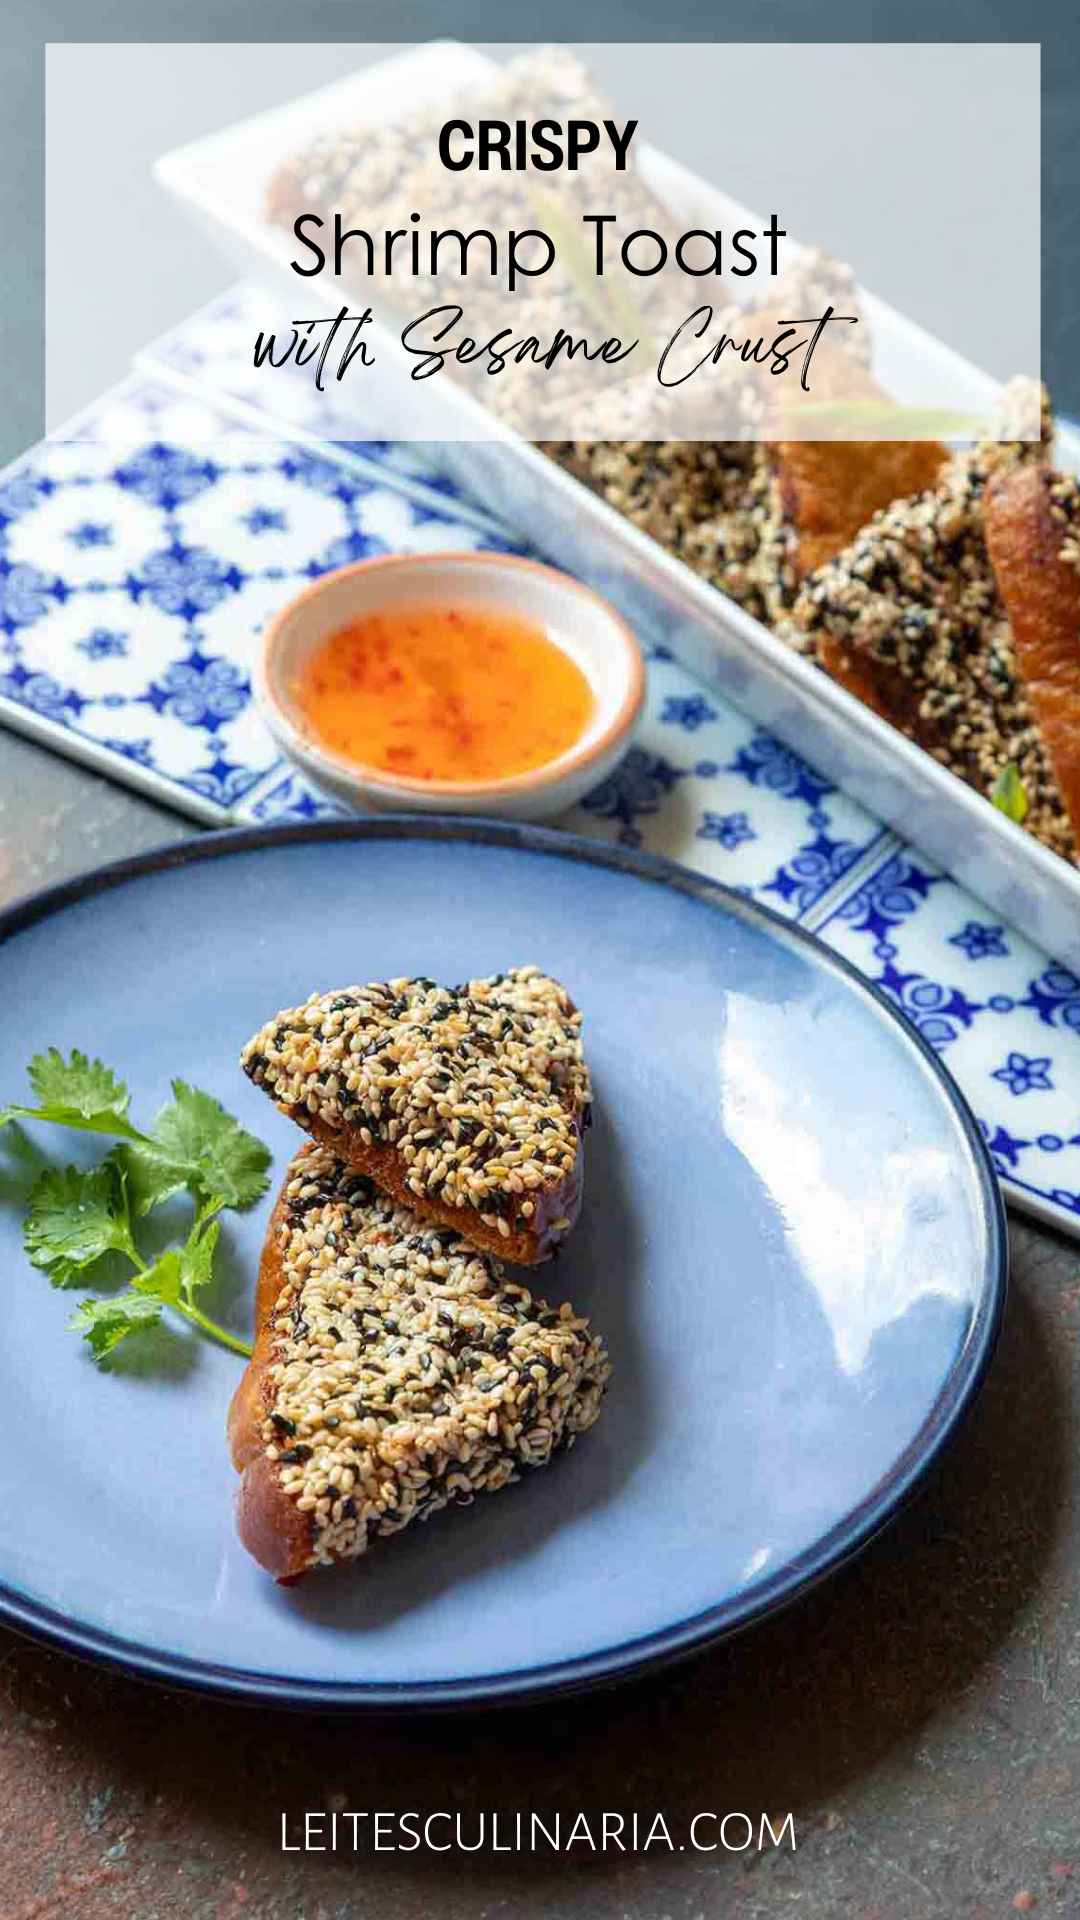 Two triangles of crispy shrimp toast on a blue plate with a sprig of cilantro and a tray of shrimp toast and dipping sauce in the background.